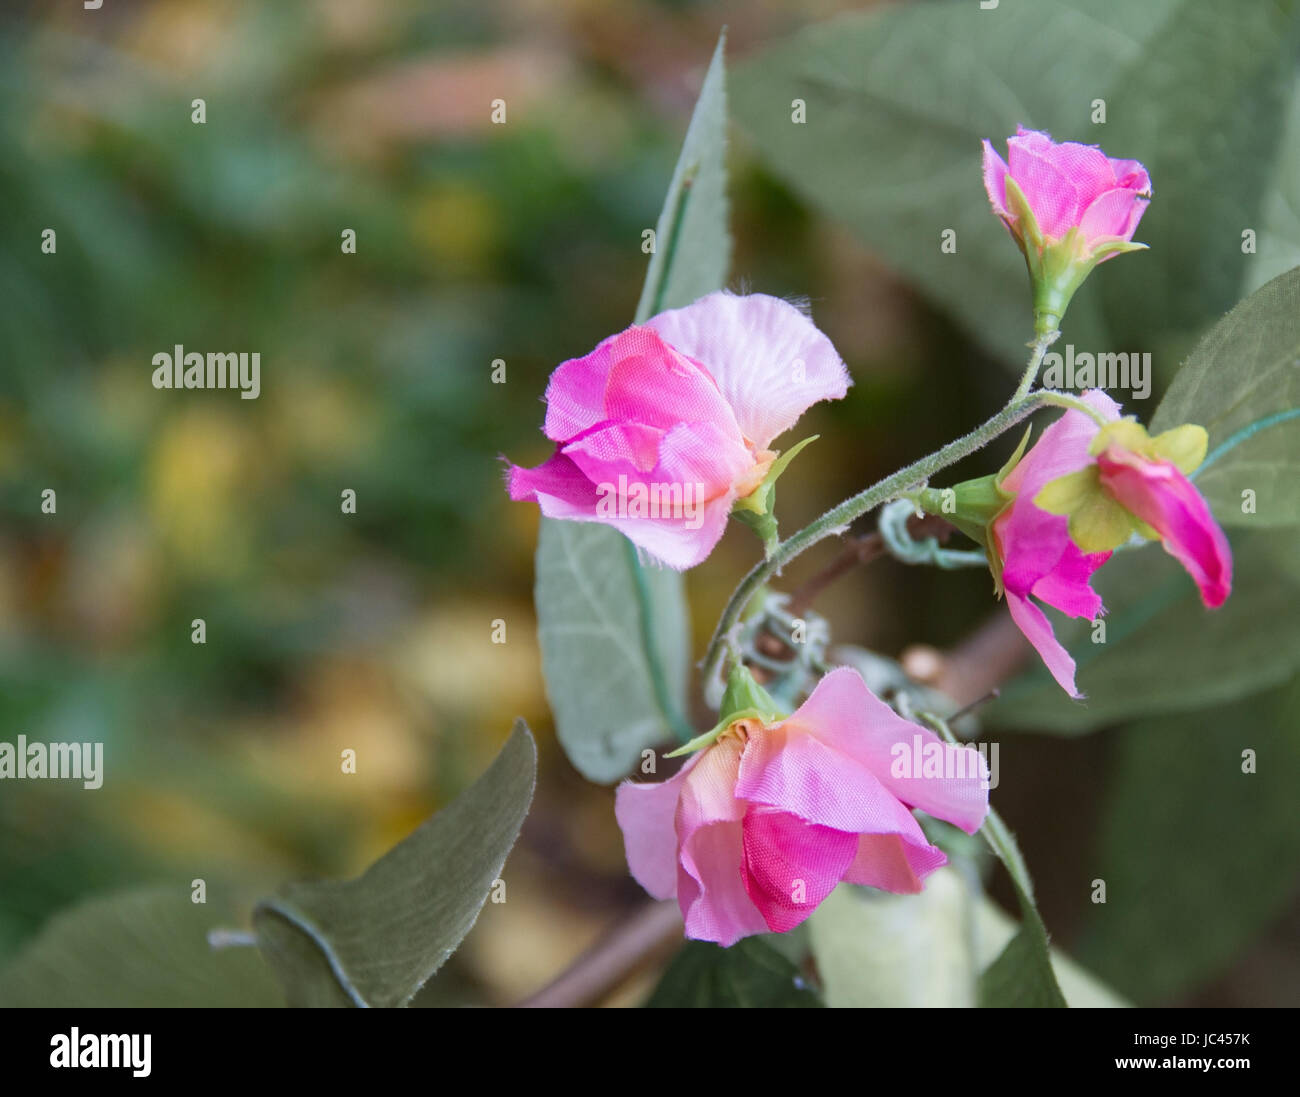 detail shot of artificial pink flowers and green leaves Stock Photo